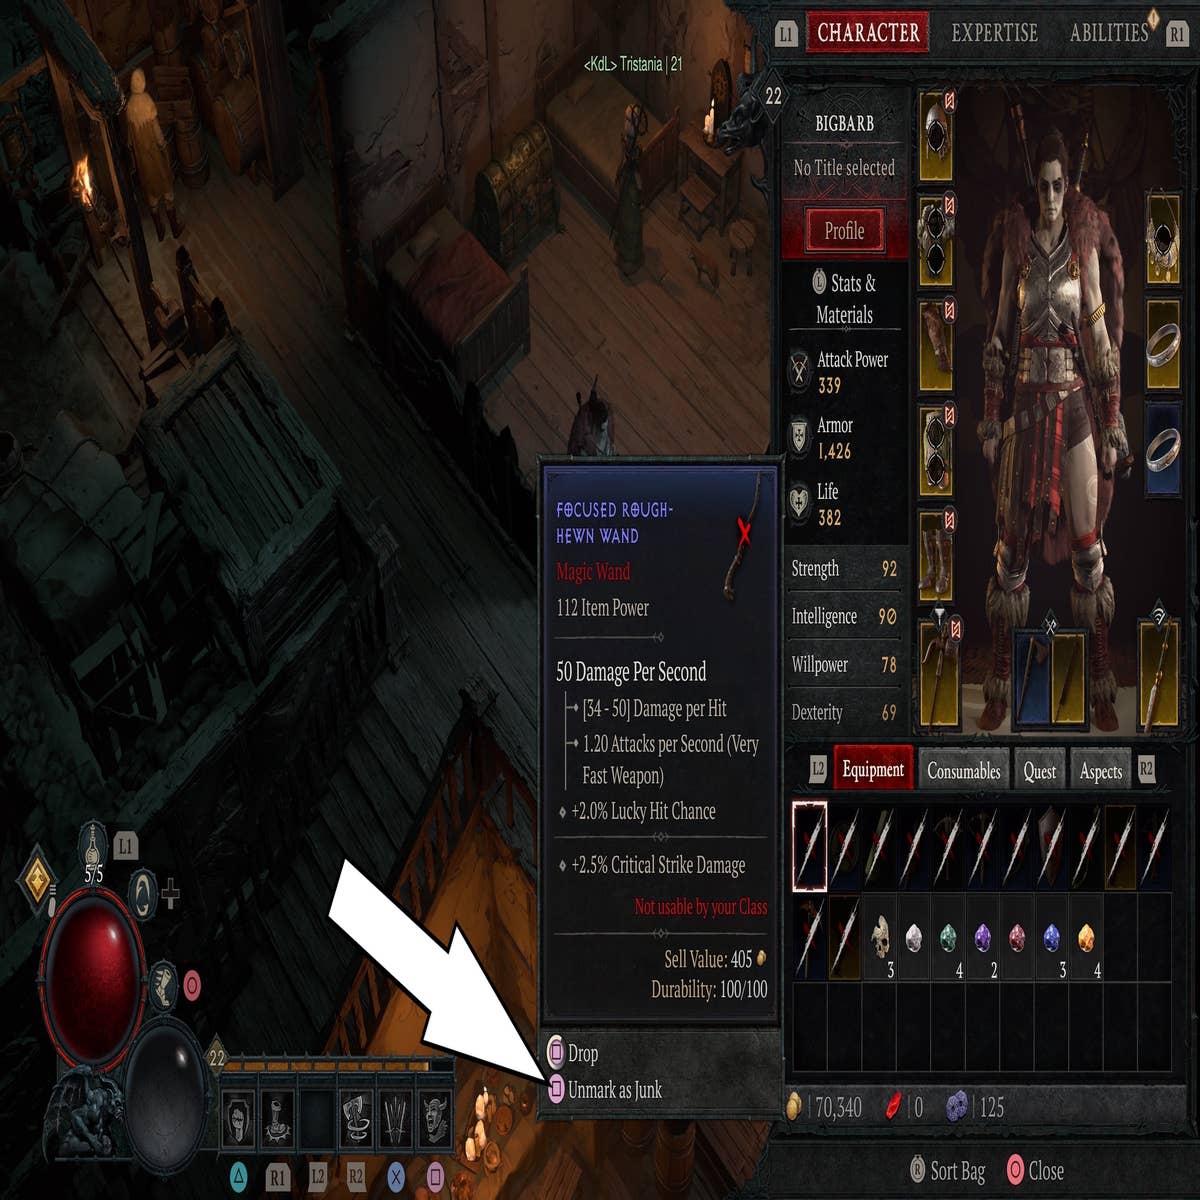 Diablo 4 Sell or Salvage: What Should You Do With Gear?